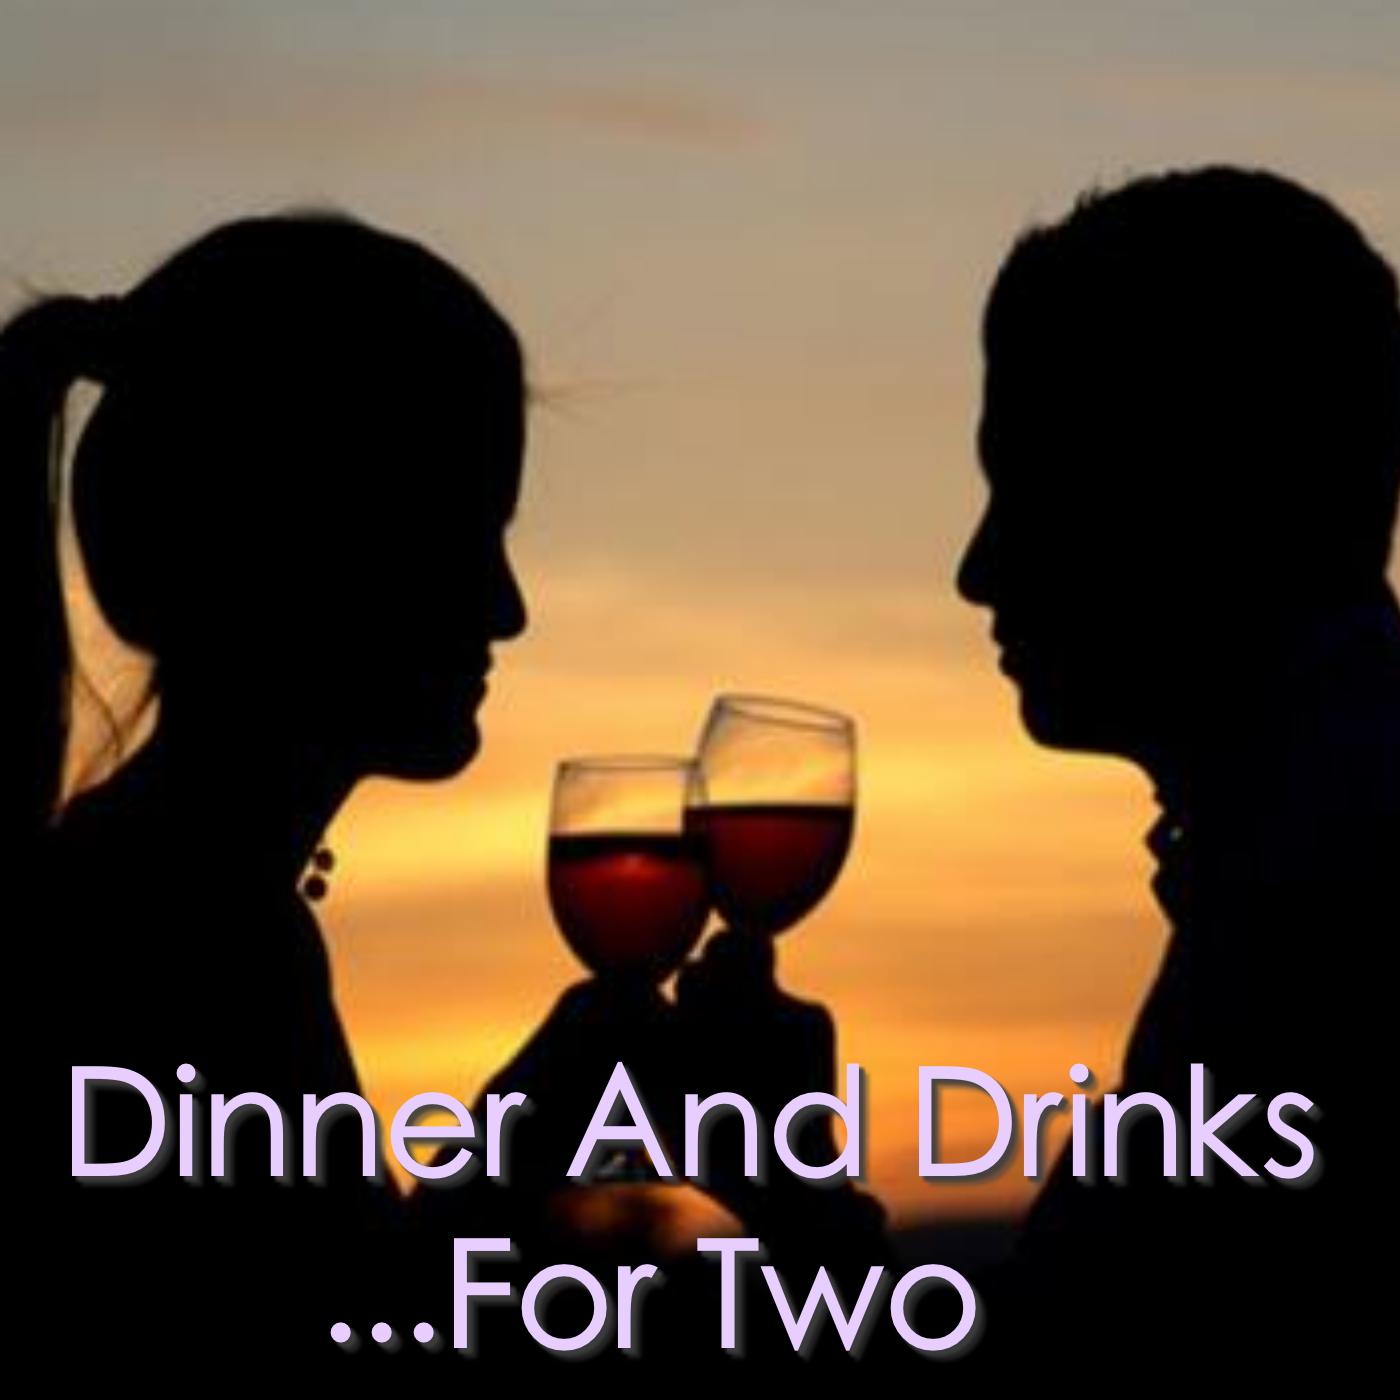 Dinner And Drinks... For Two